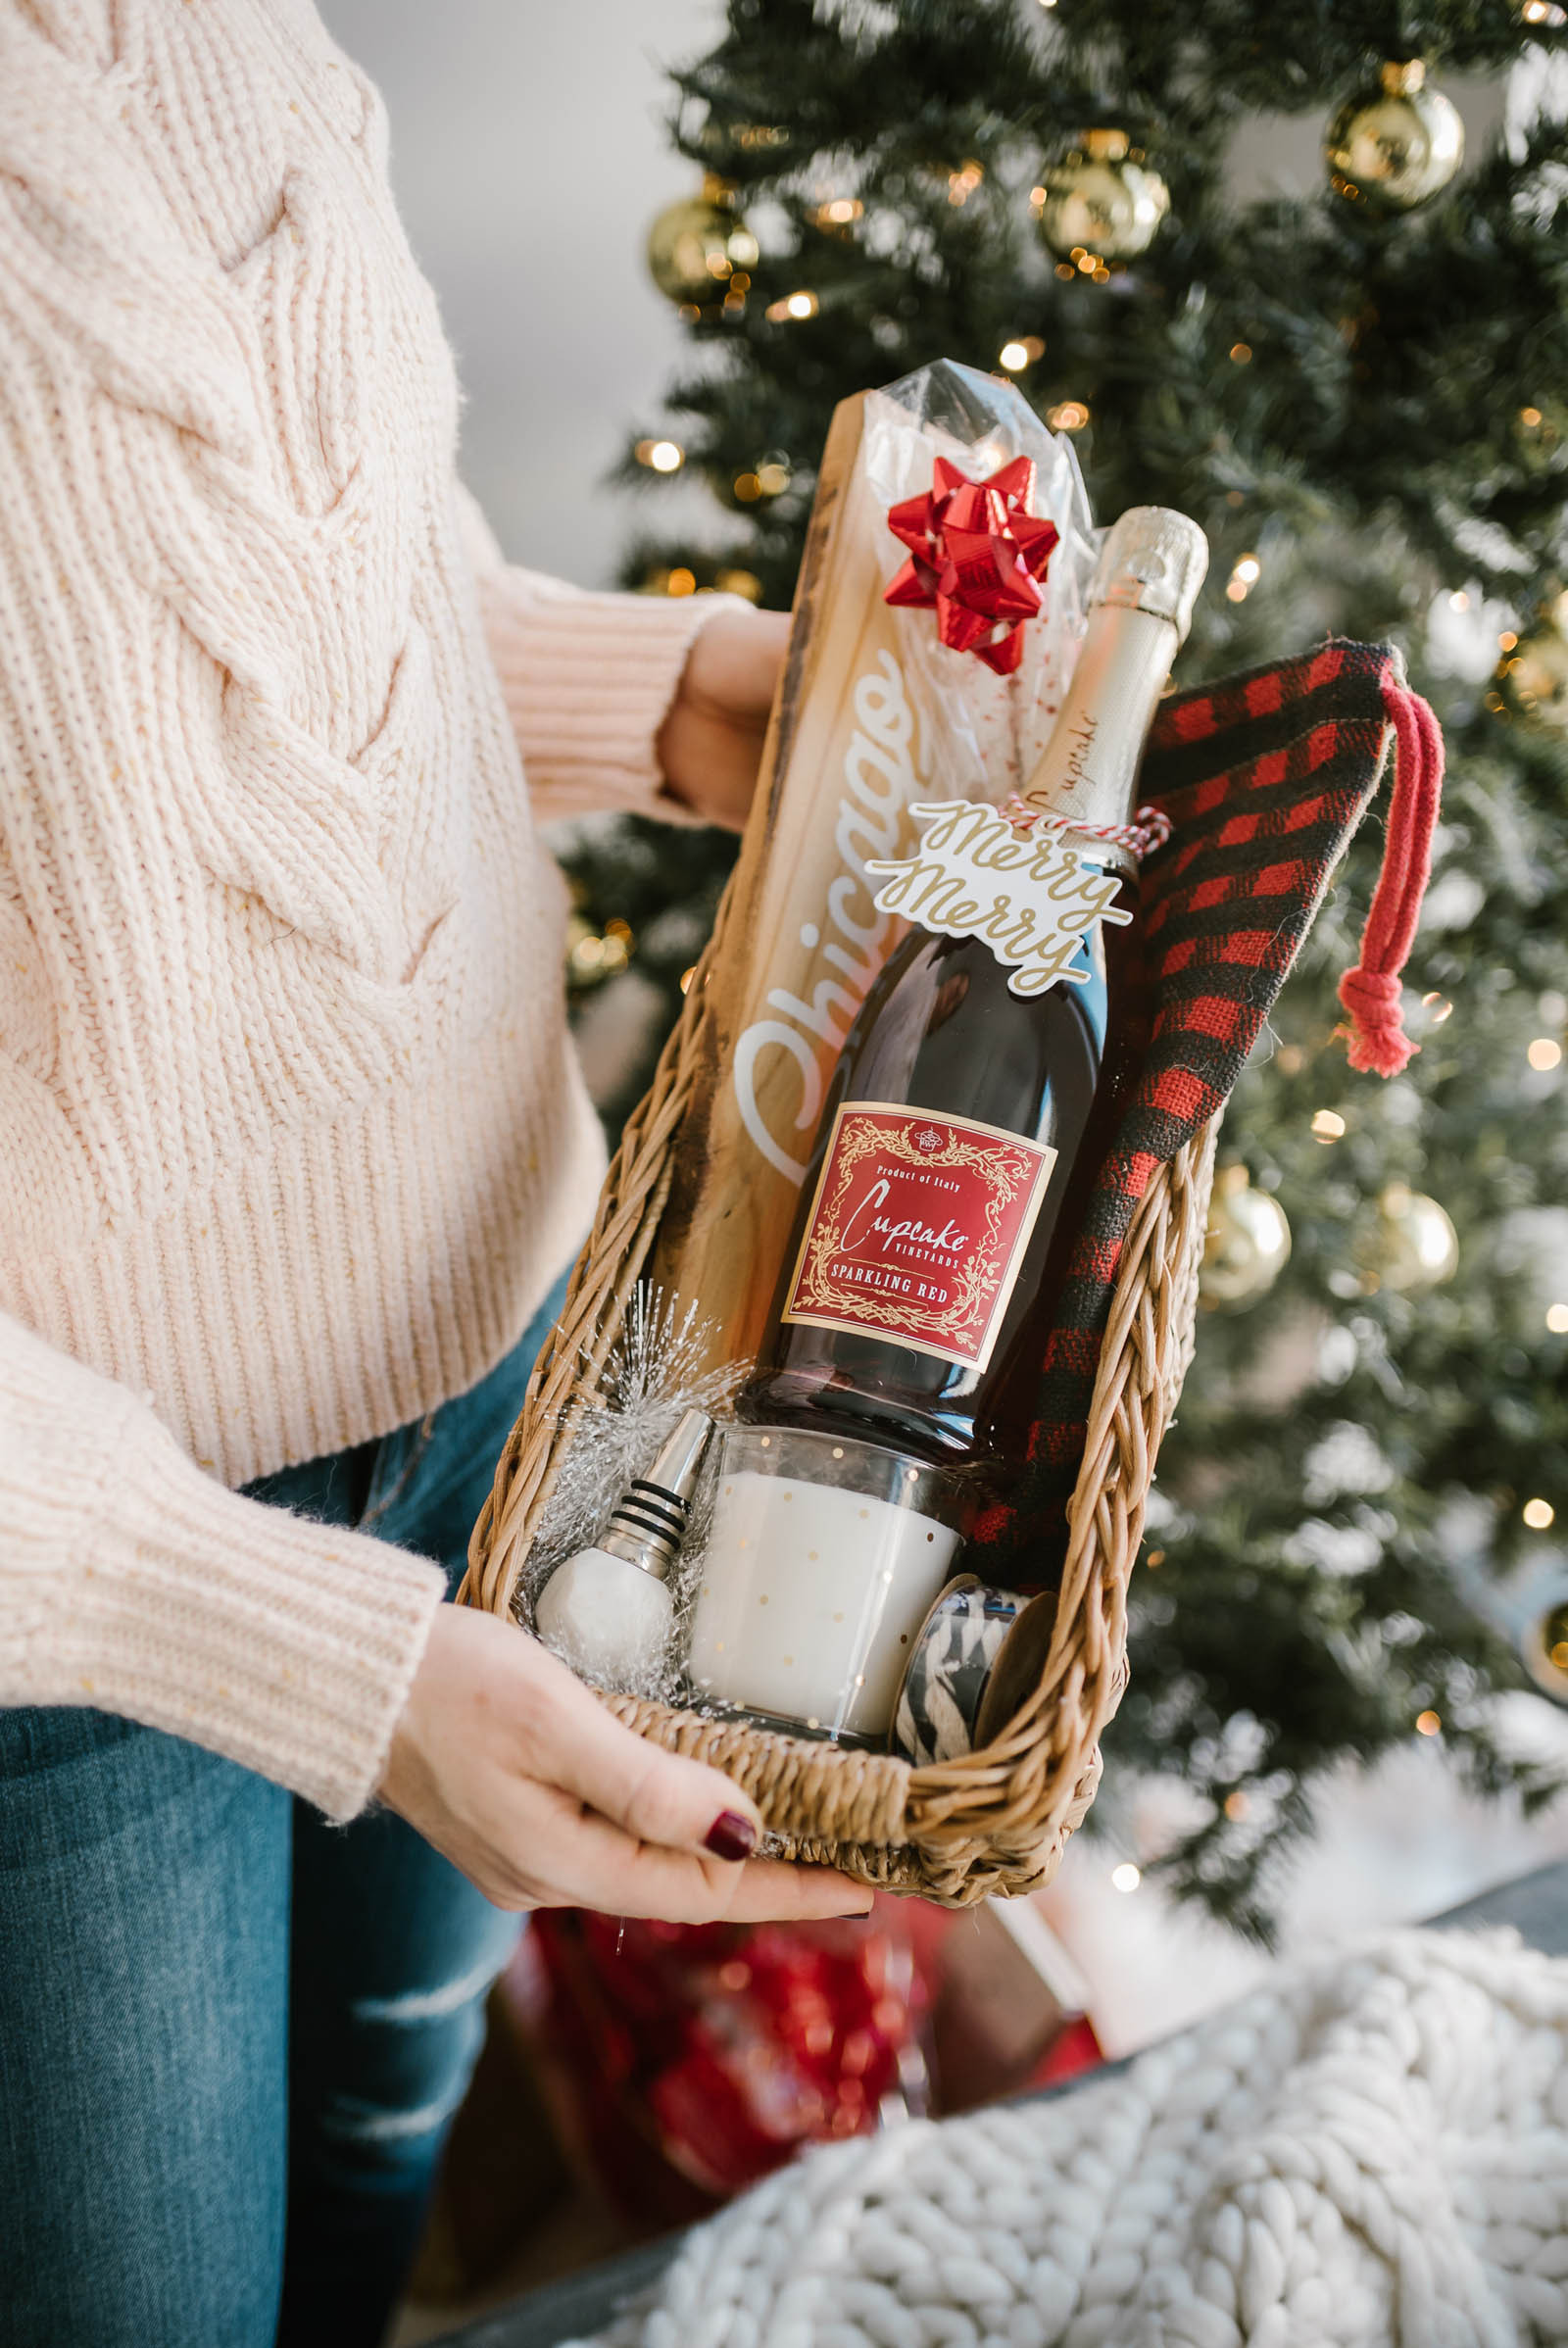 Holiday Gift Basket Ideas
 Last Minute Holiday Idea Easy Homemade Gift Baskets